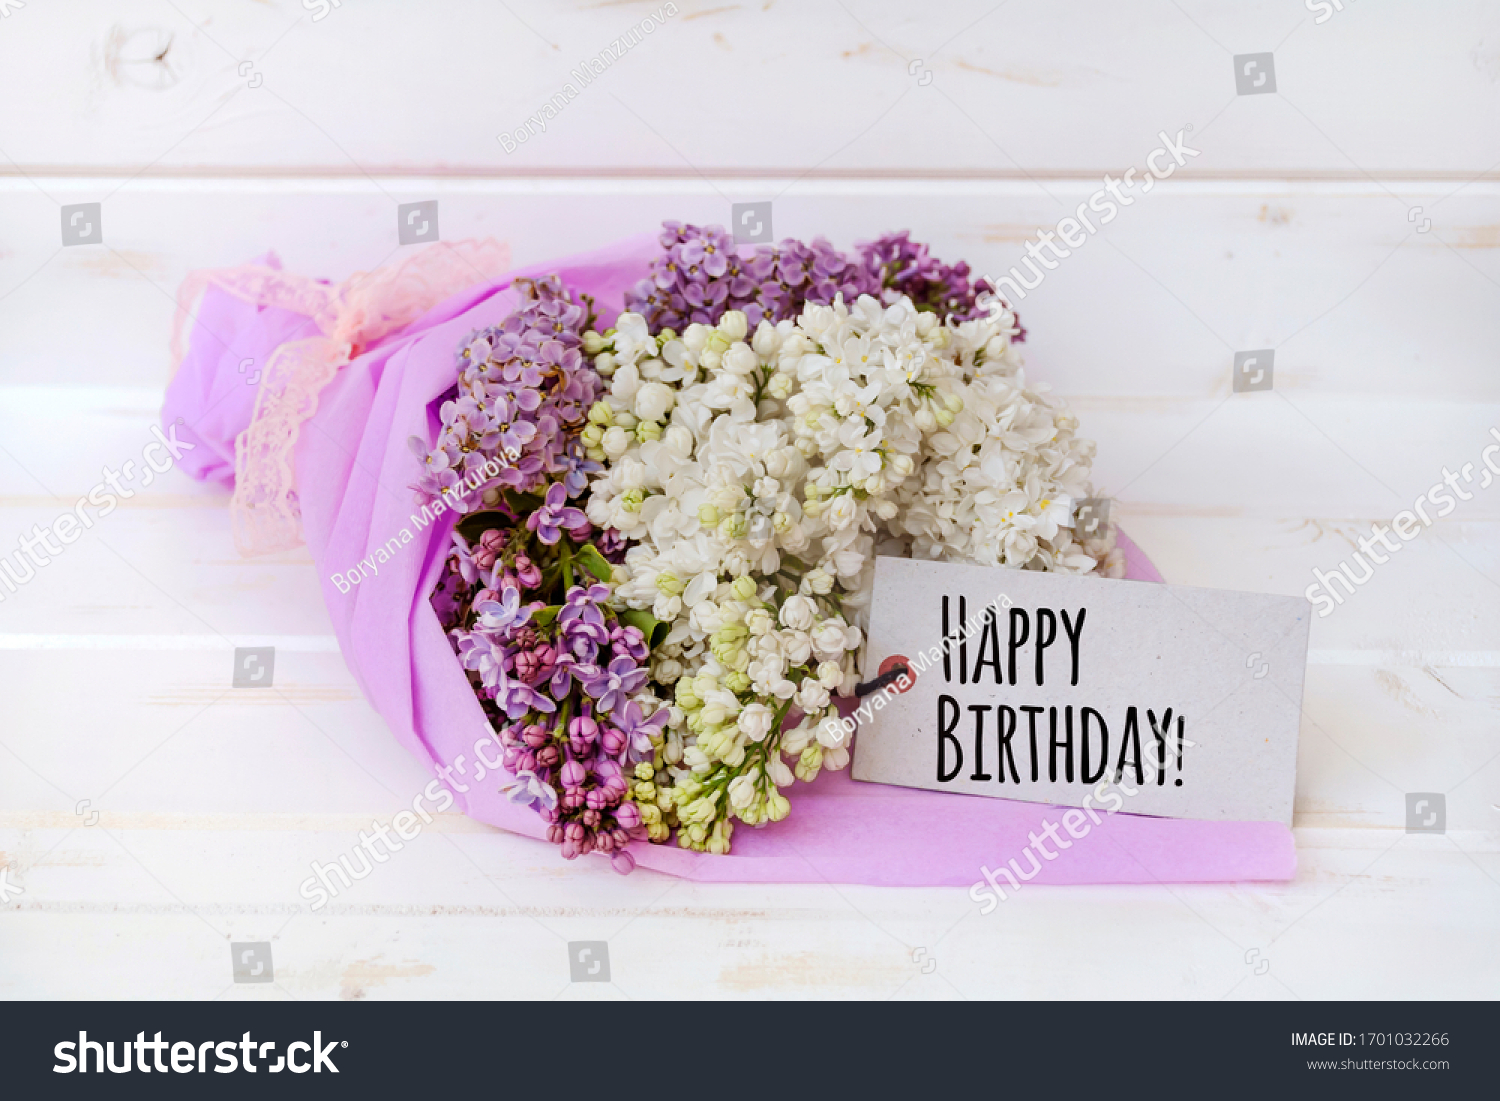 Bouquet Lilac Happy Birthday Greeting Card Stock Photo 1701032266 ...